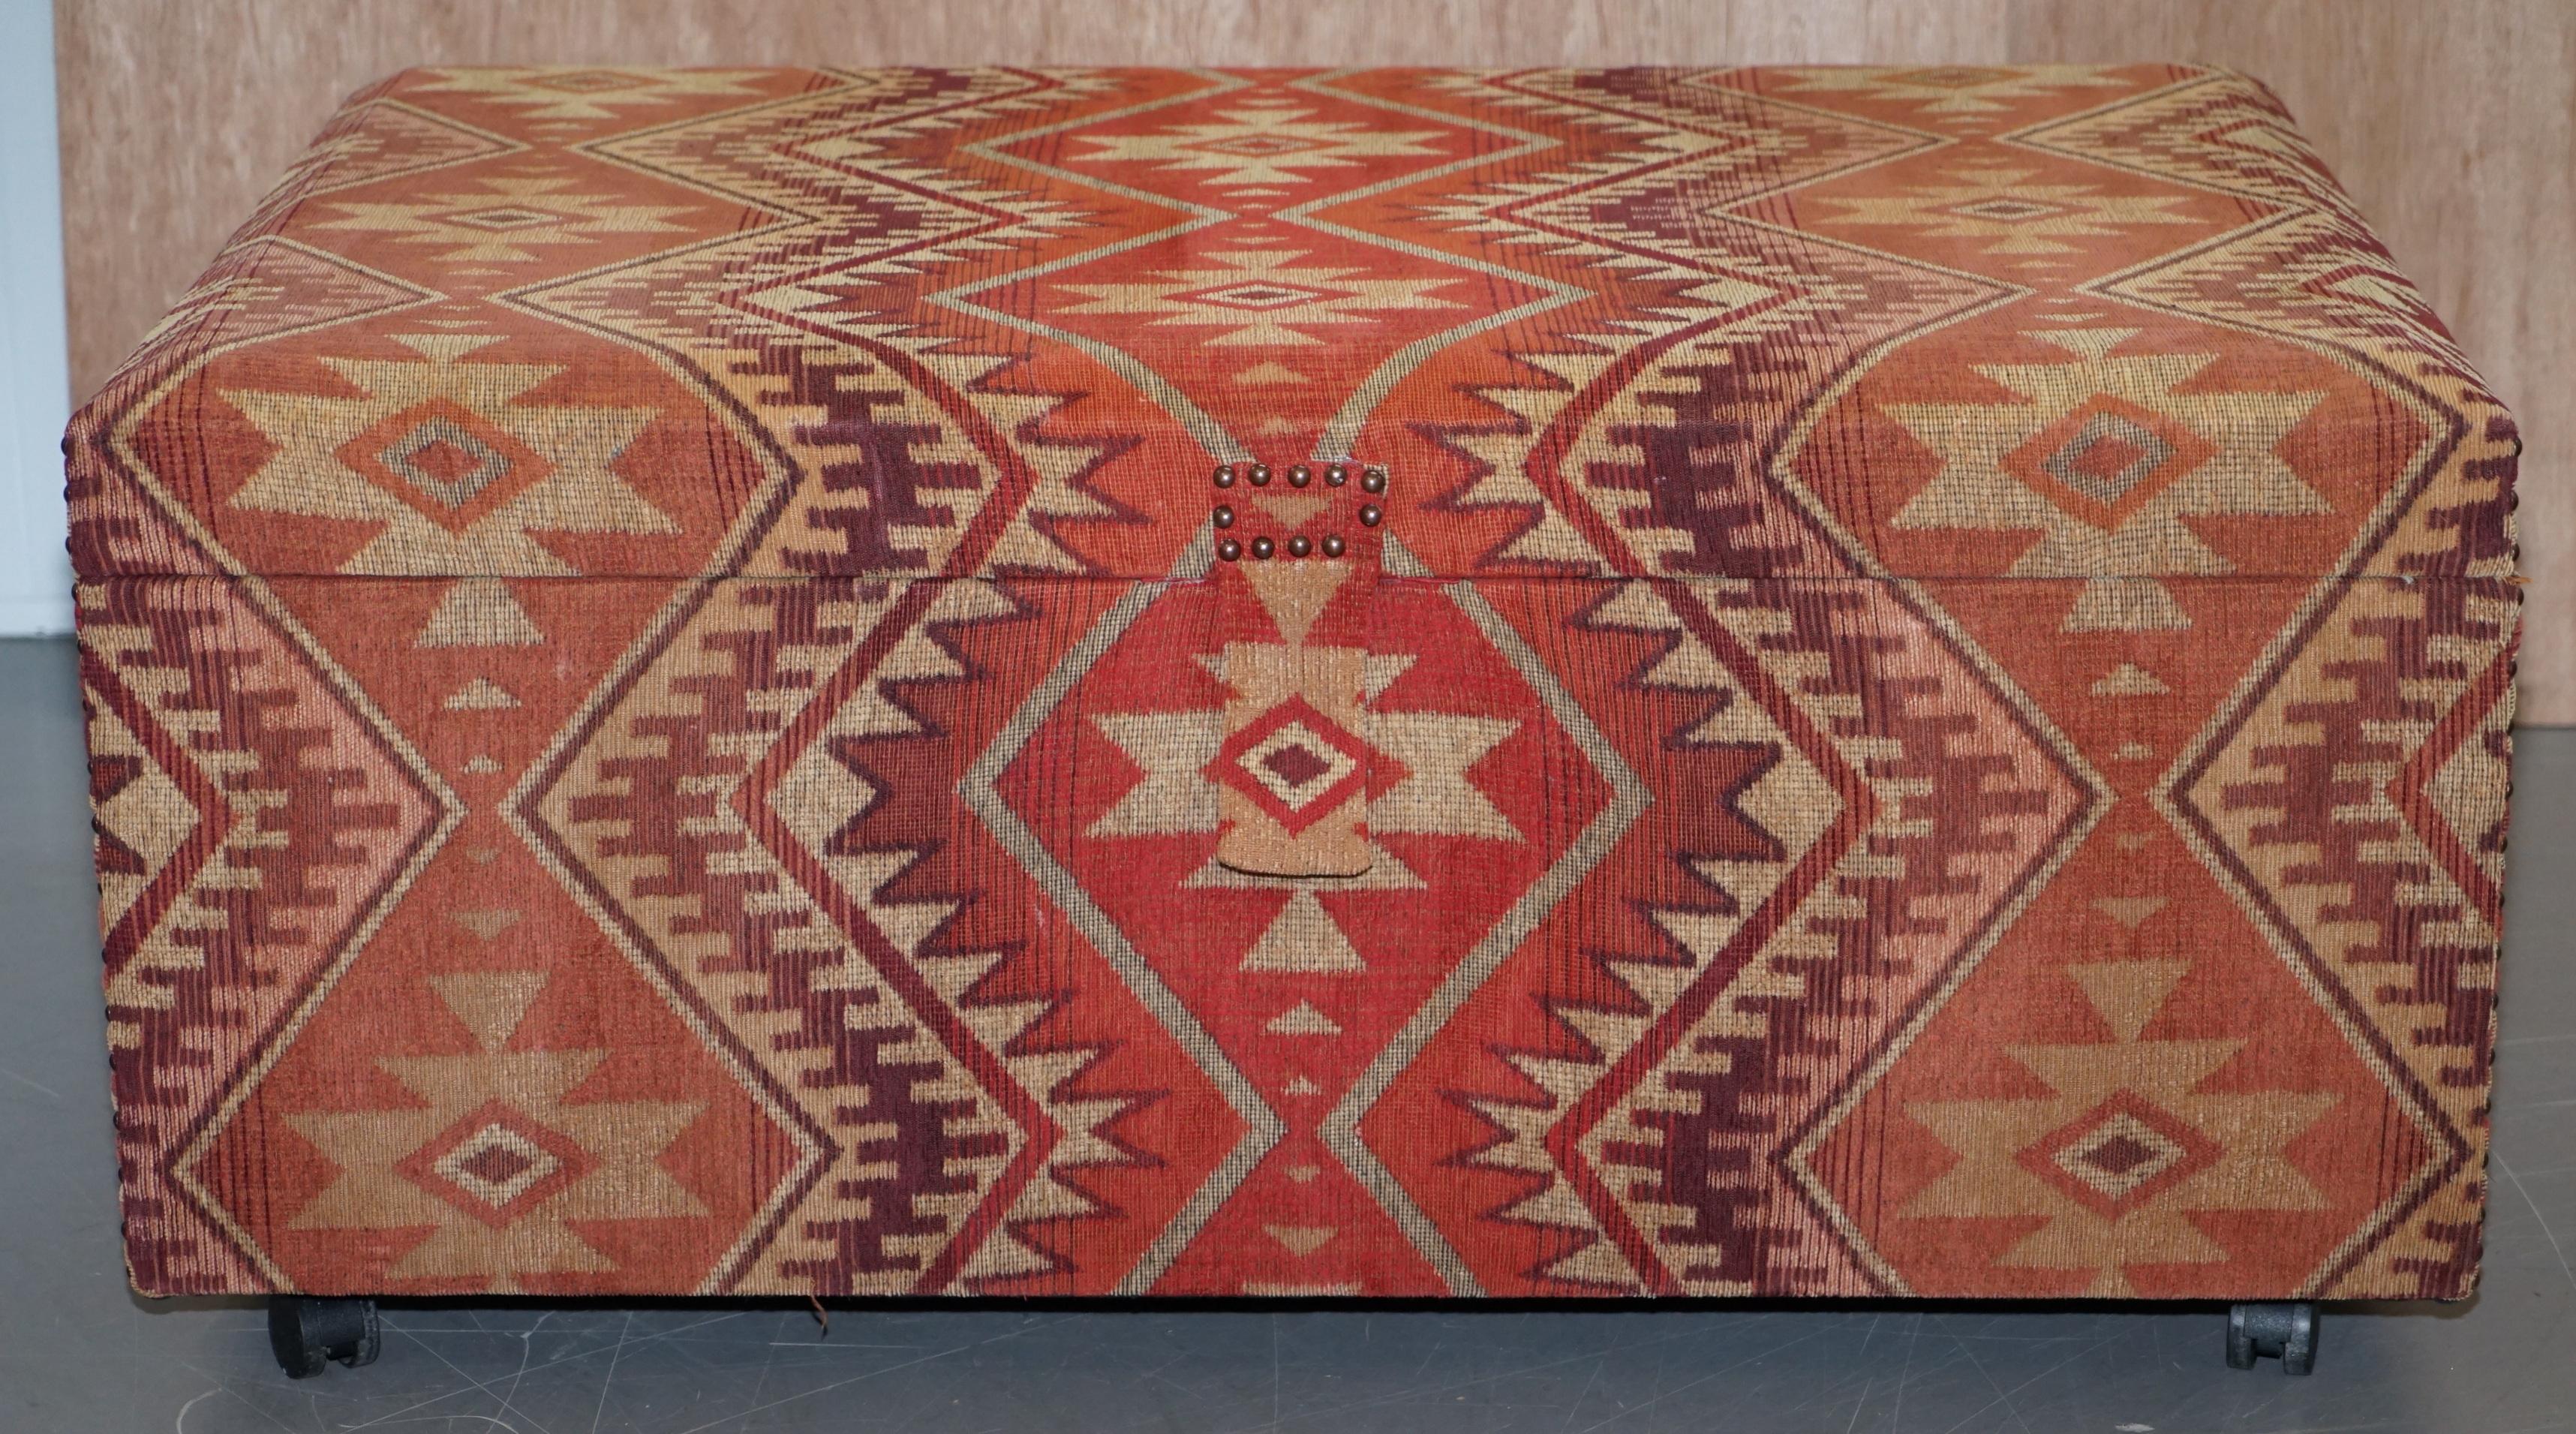 Hand-Crafted Very Large Rare Victorian Silk Lined Kilim Upholstered Ottoman Truck Stool Bench